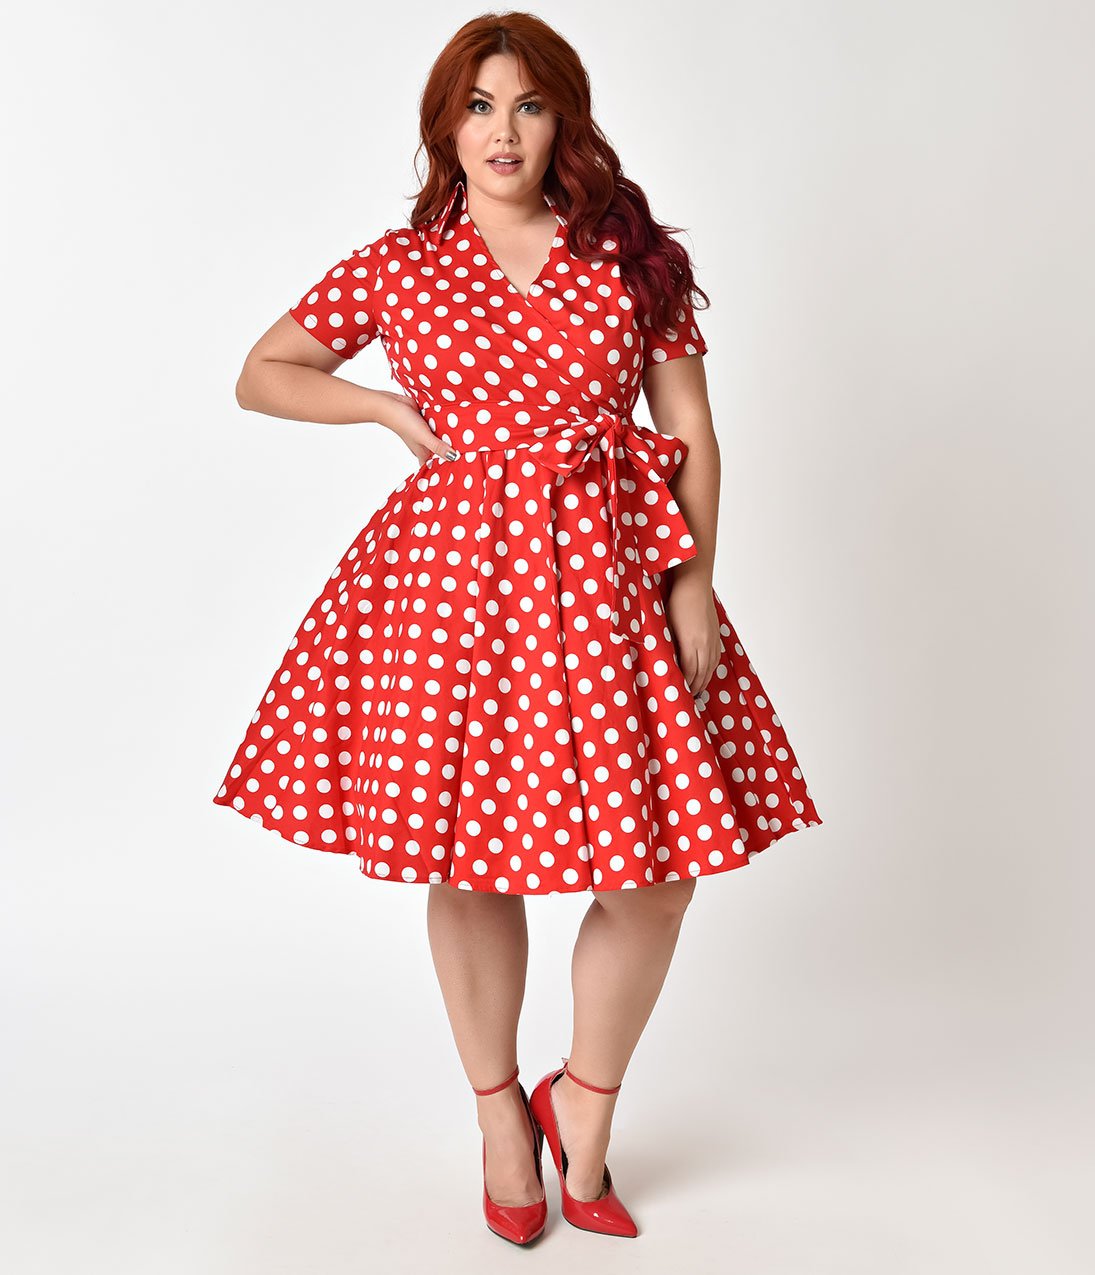 red and white plus size dress